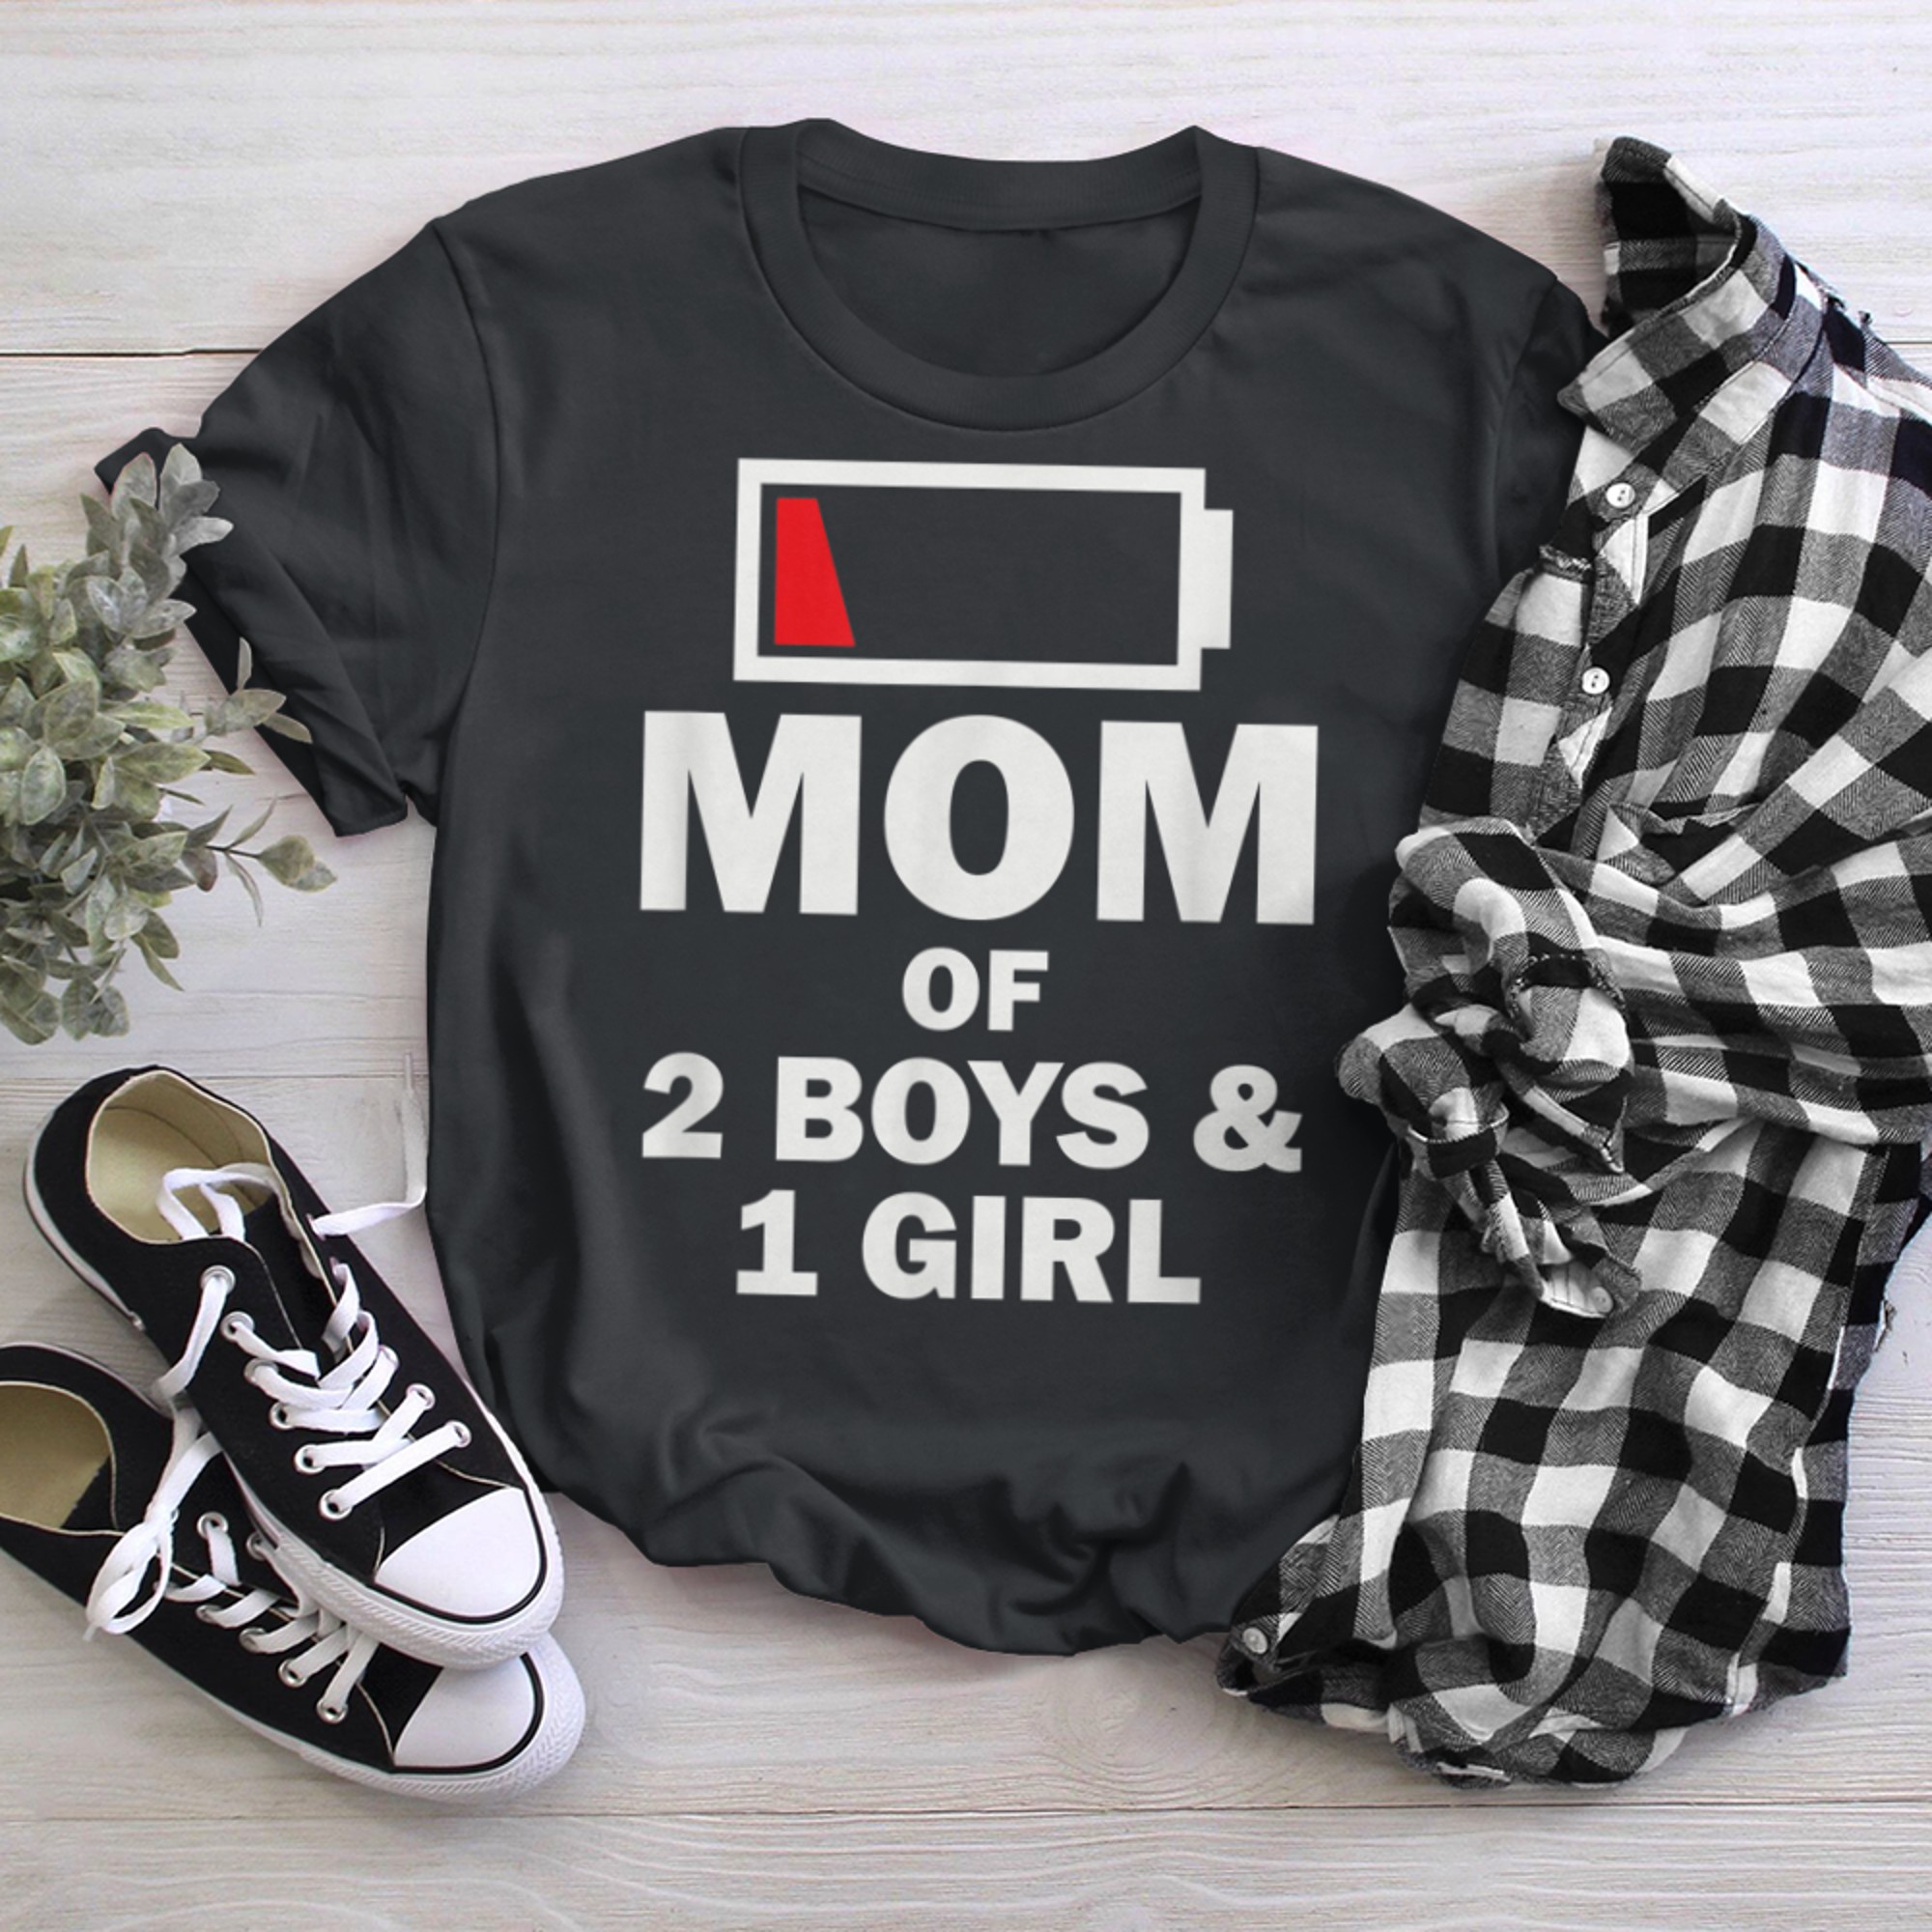 Mom of Clothing Mother Wife t-shirt black